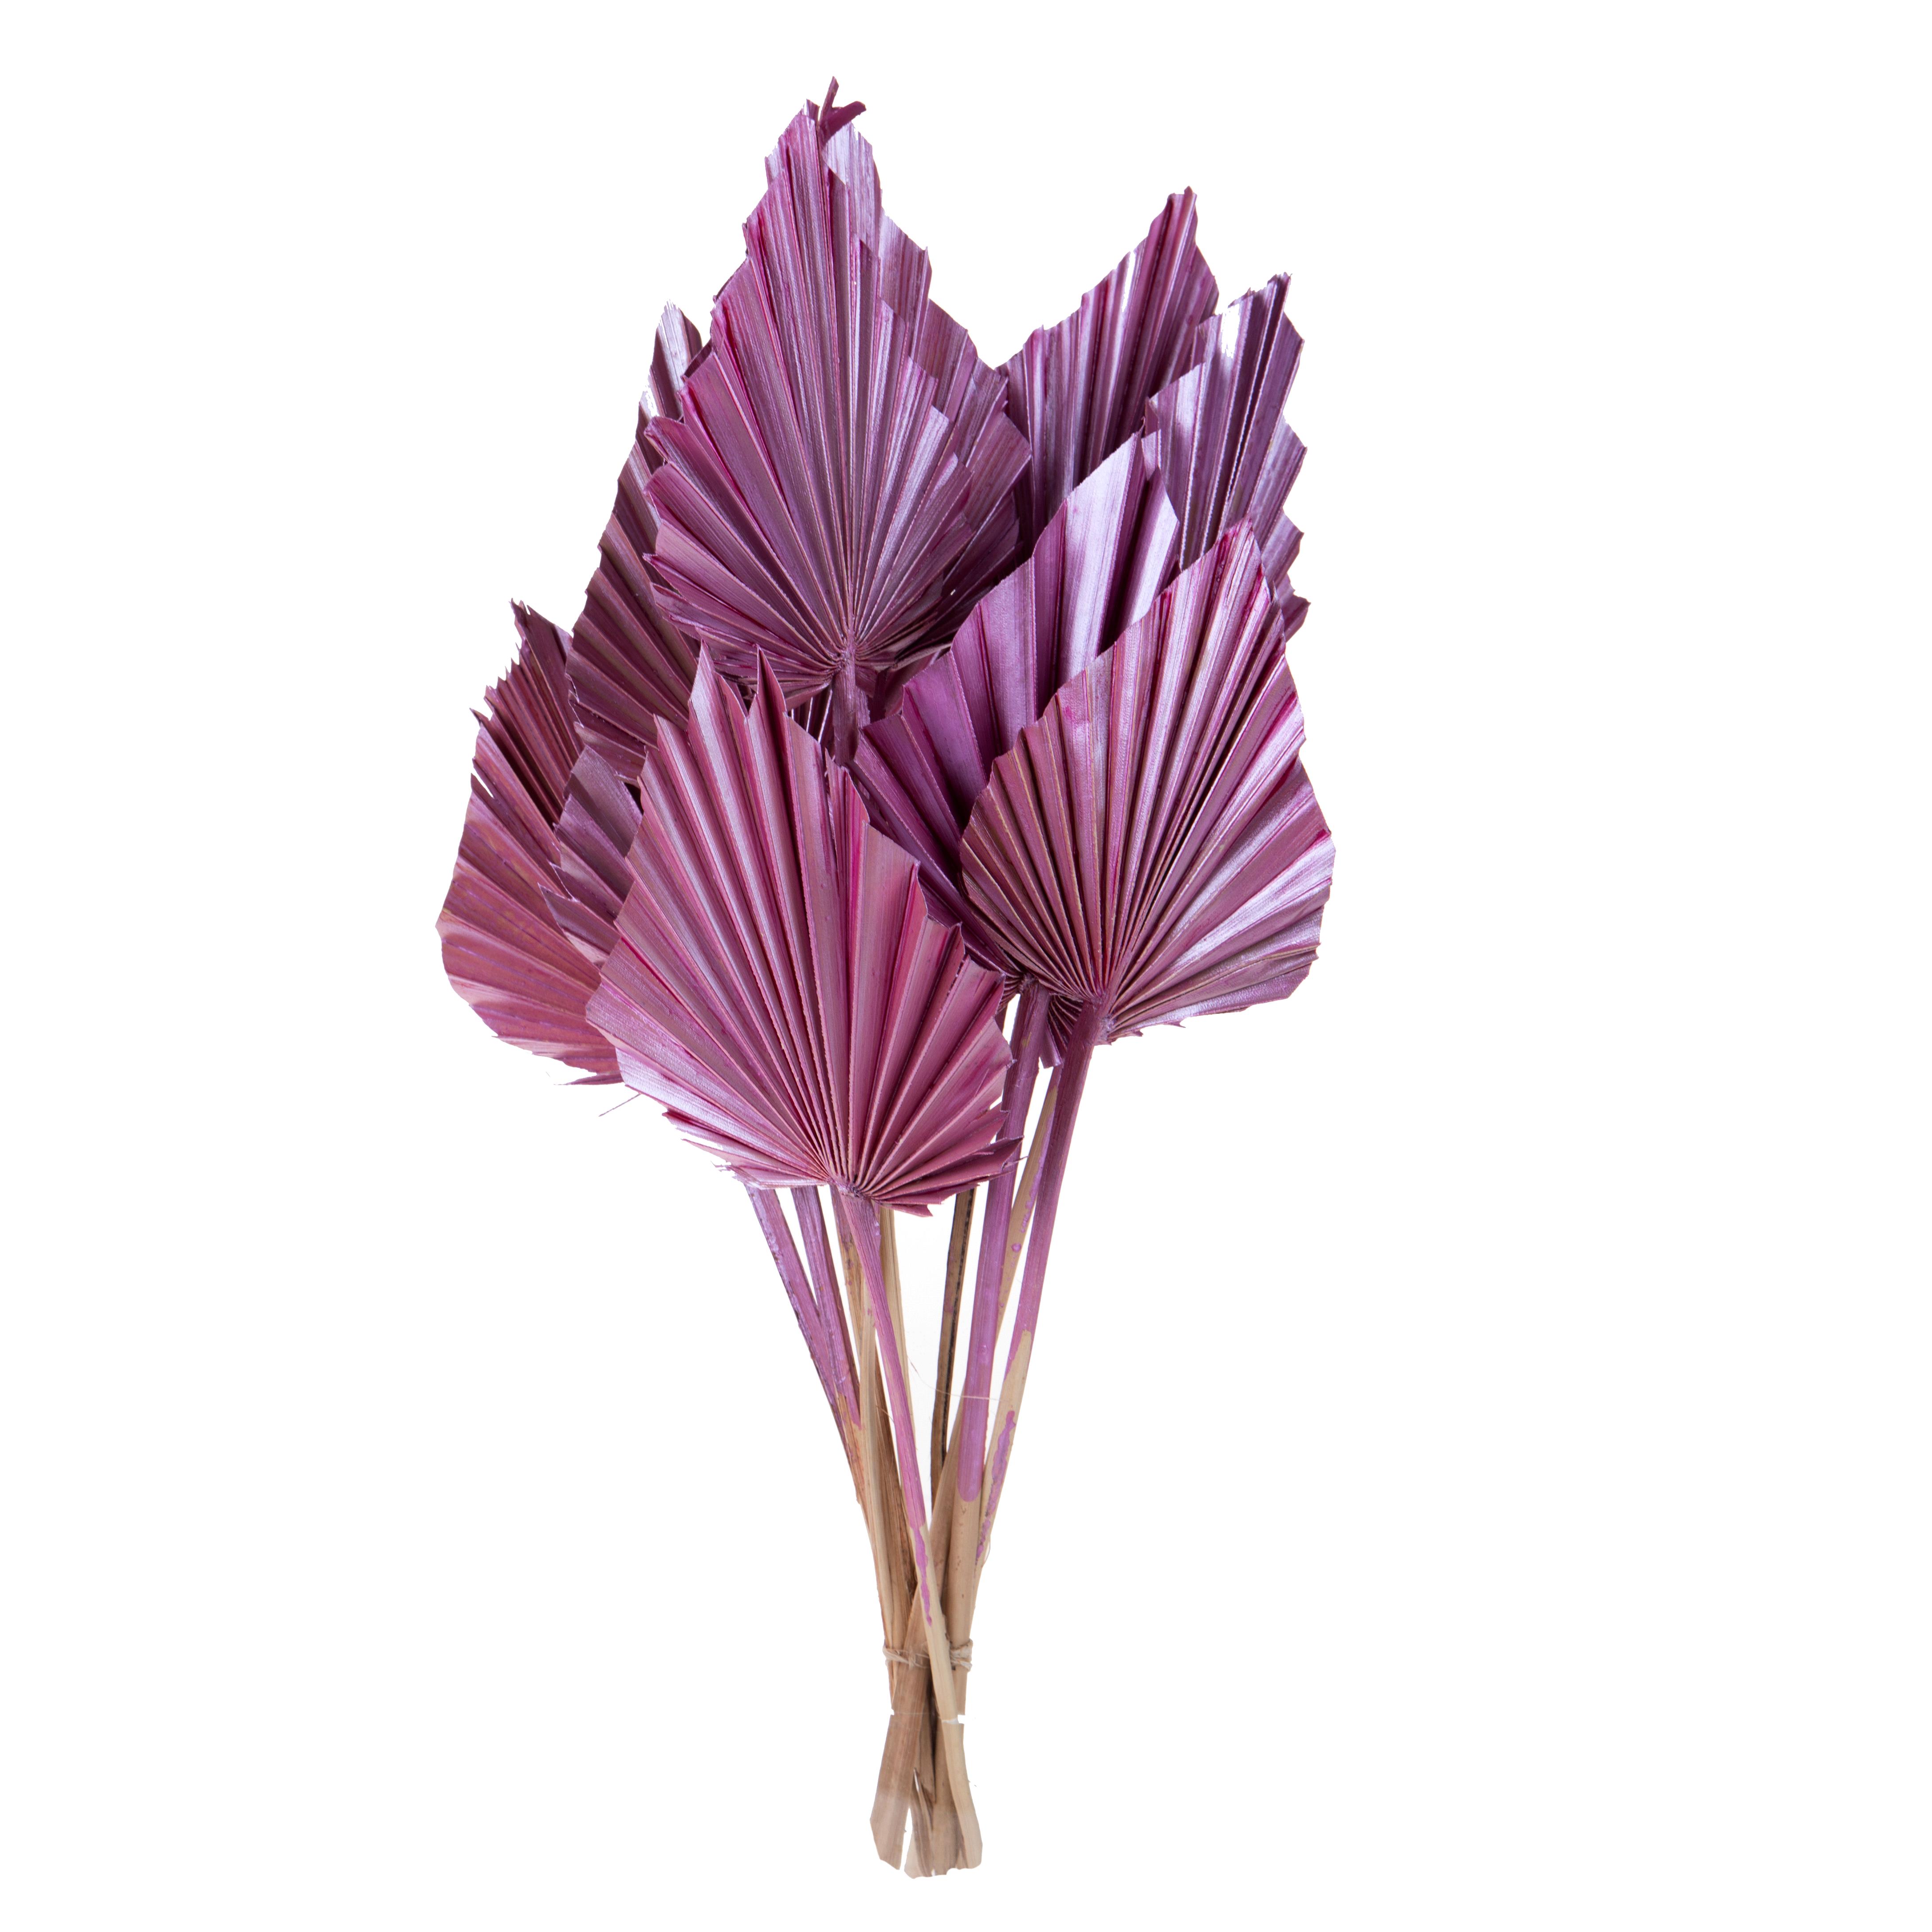 CHRISTMAS ITEMS, DRIED FLOWERS AND STEM ITEMS FOR CHRISTMAS, PALM SPEAR 10 PZ 55 CM METALLICO